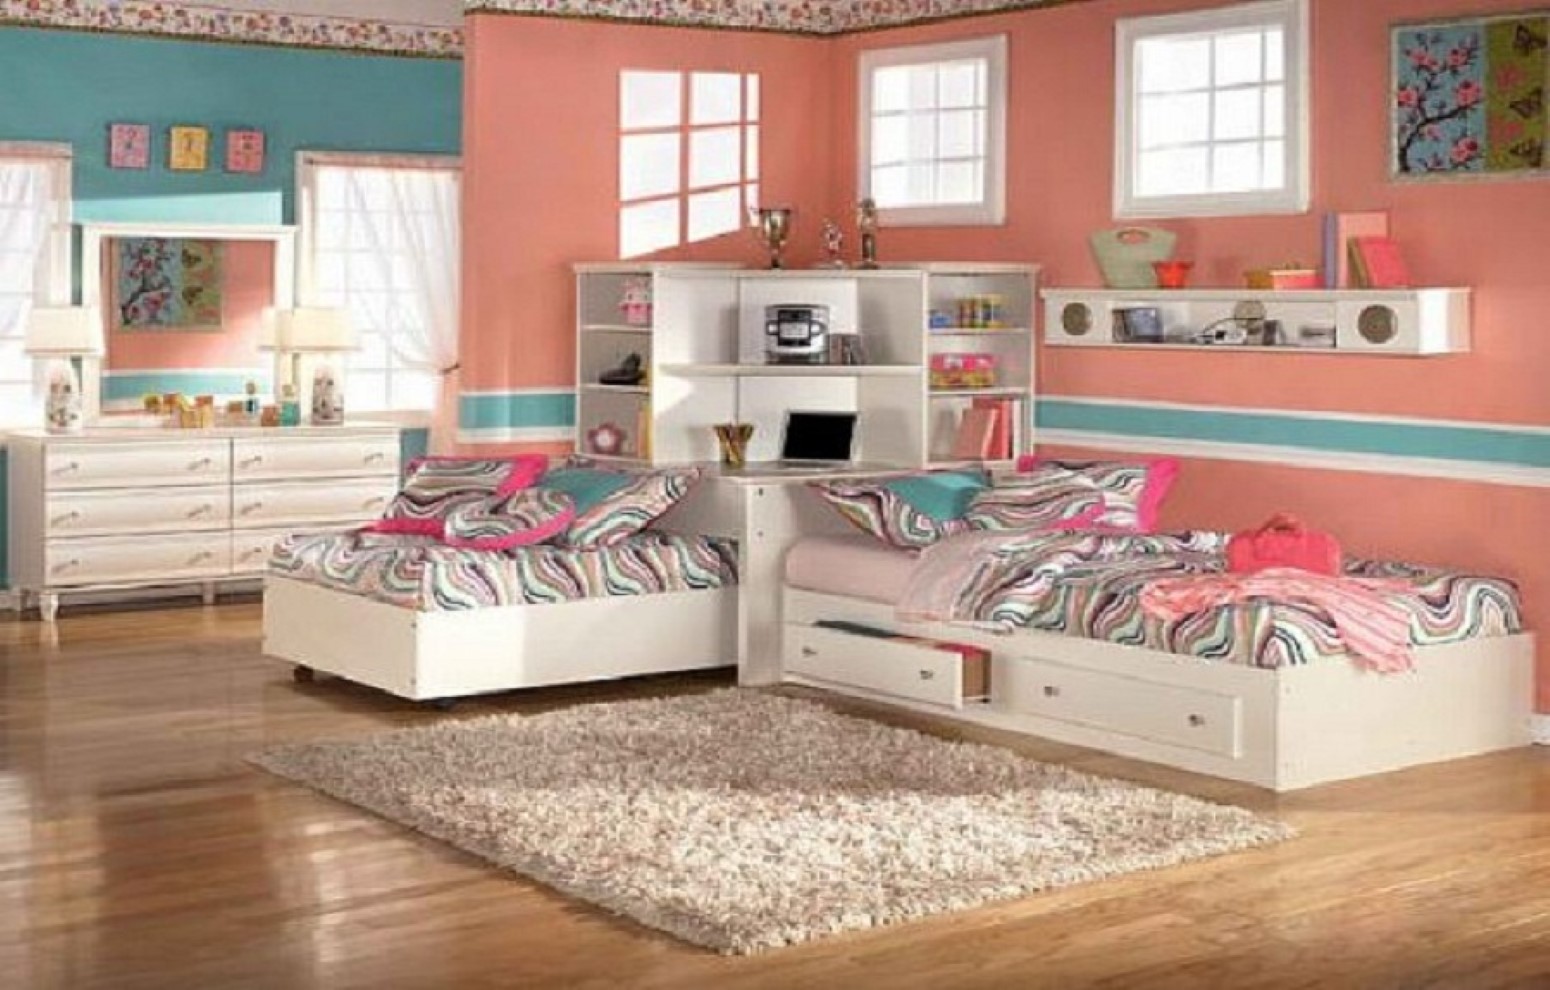 L Shaped With Superb L Shaped Bunk Beds With Organizer Headboard In Cheerful Twin Bedroom Sets Bedroom Creative Twin Bedroom Sets Ideas That Overflow With Style